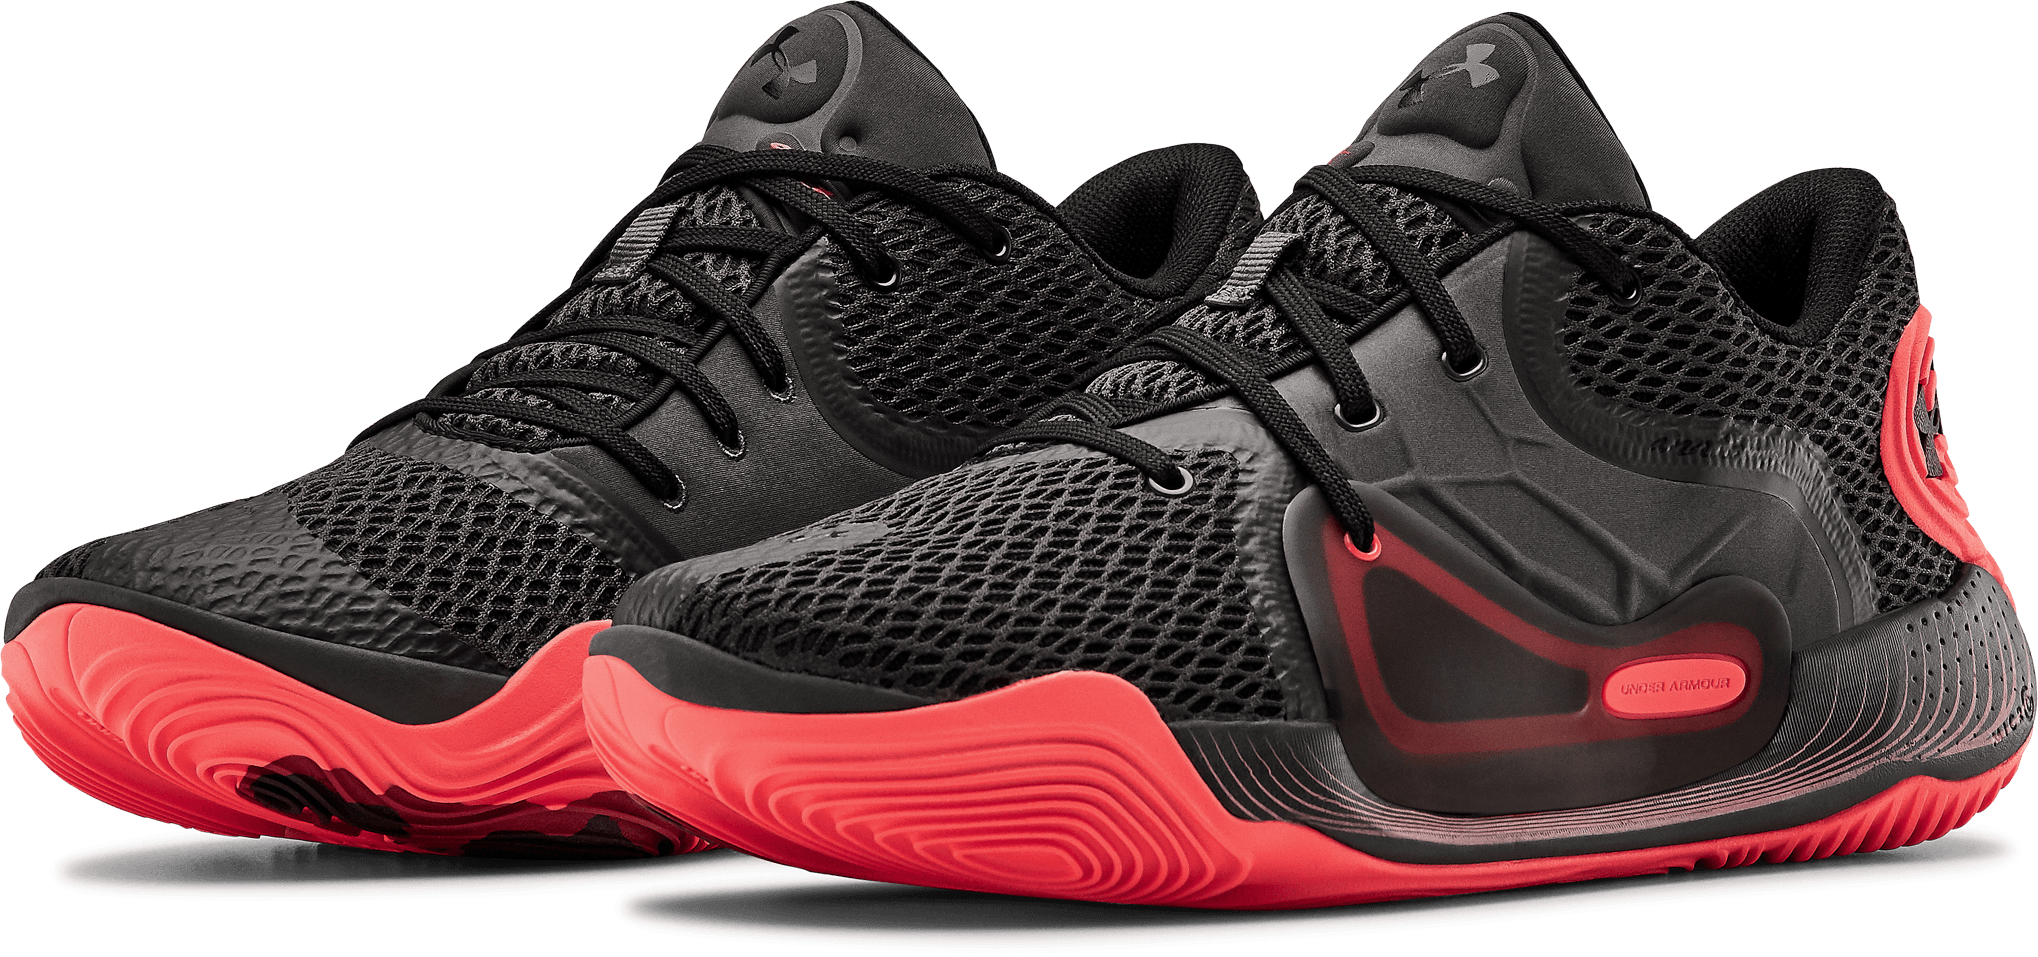 under armour anatomix spawn low review